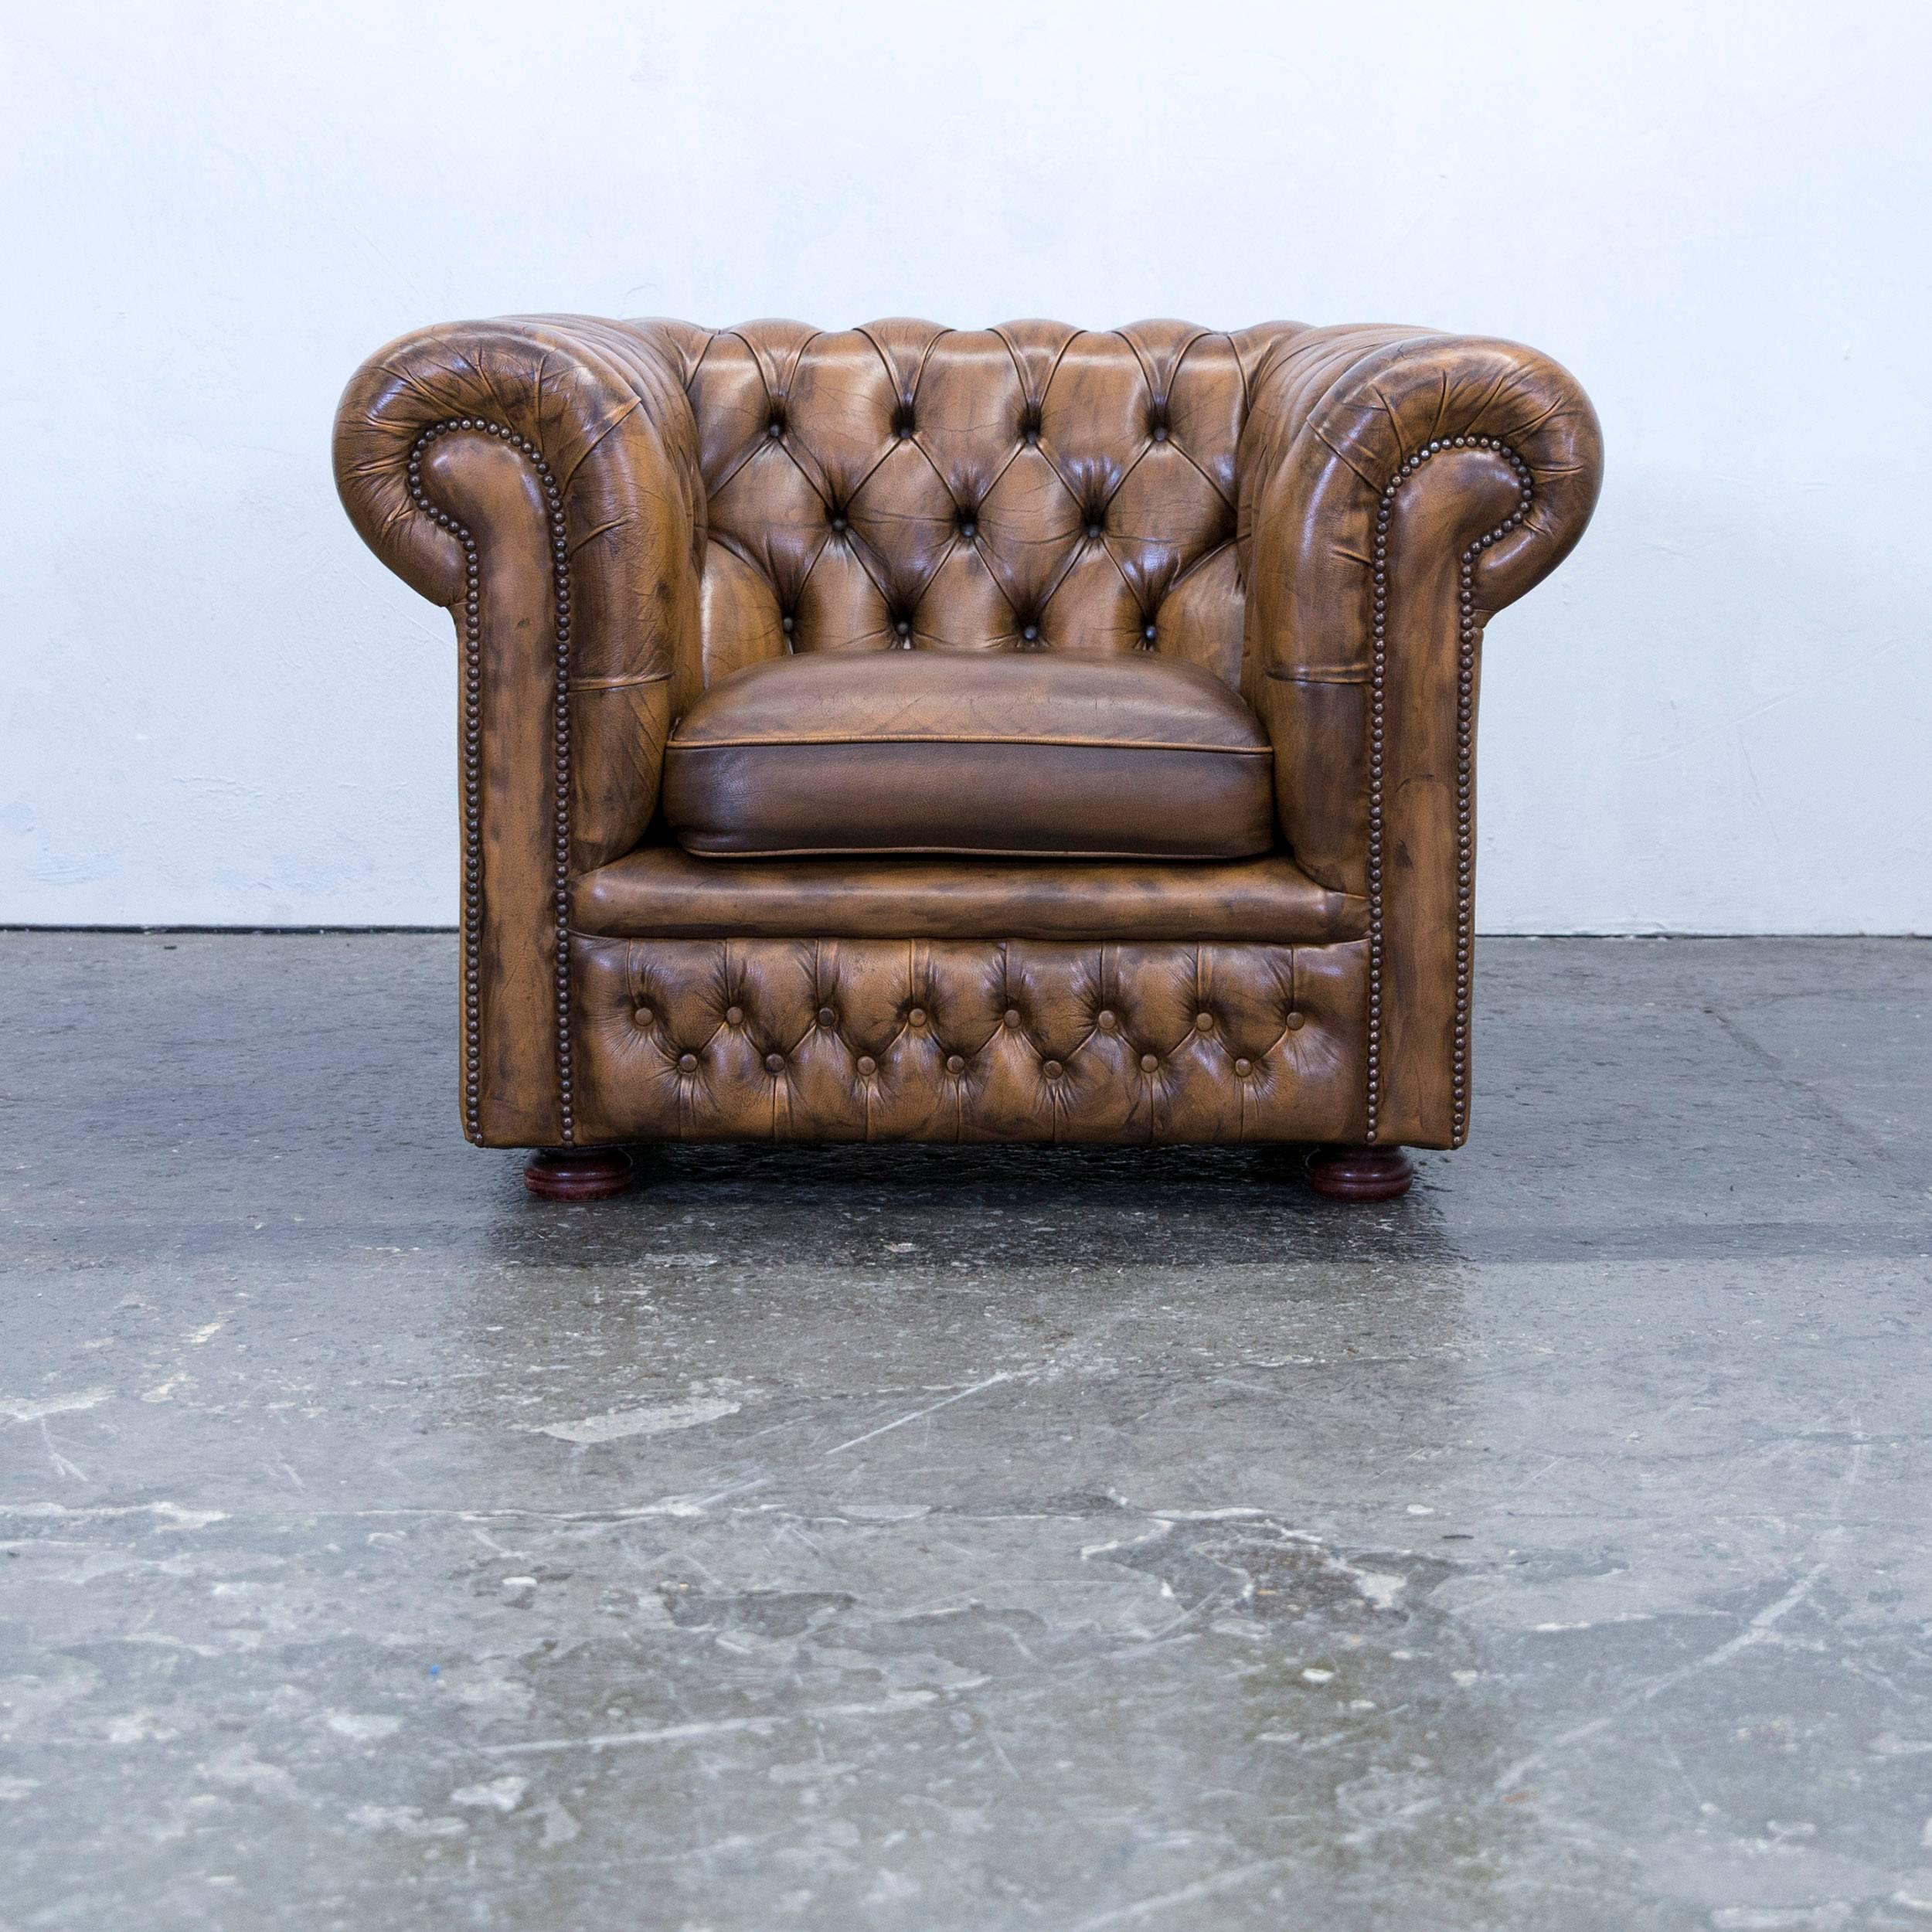 Brown colored Chesterfield leather clubchair in an elegant design, made for pure comfort.